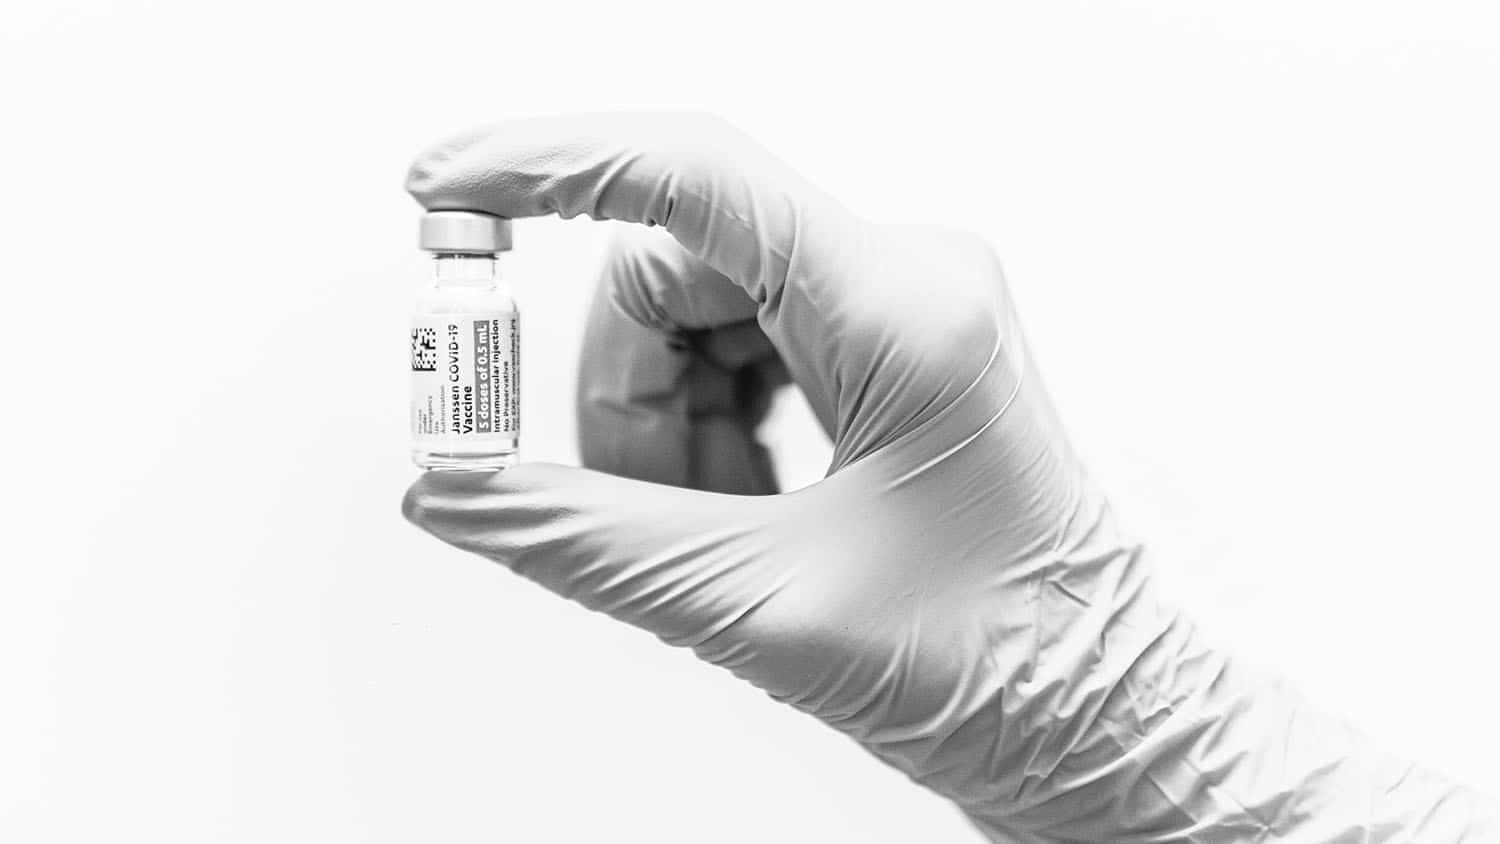 hand wearing a nitrile glove is holding a vial of vaccine